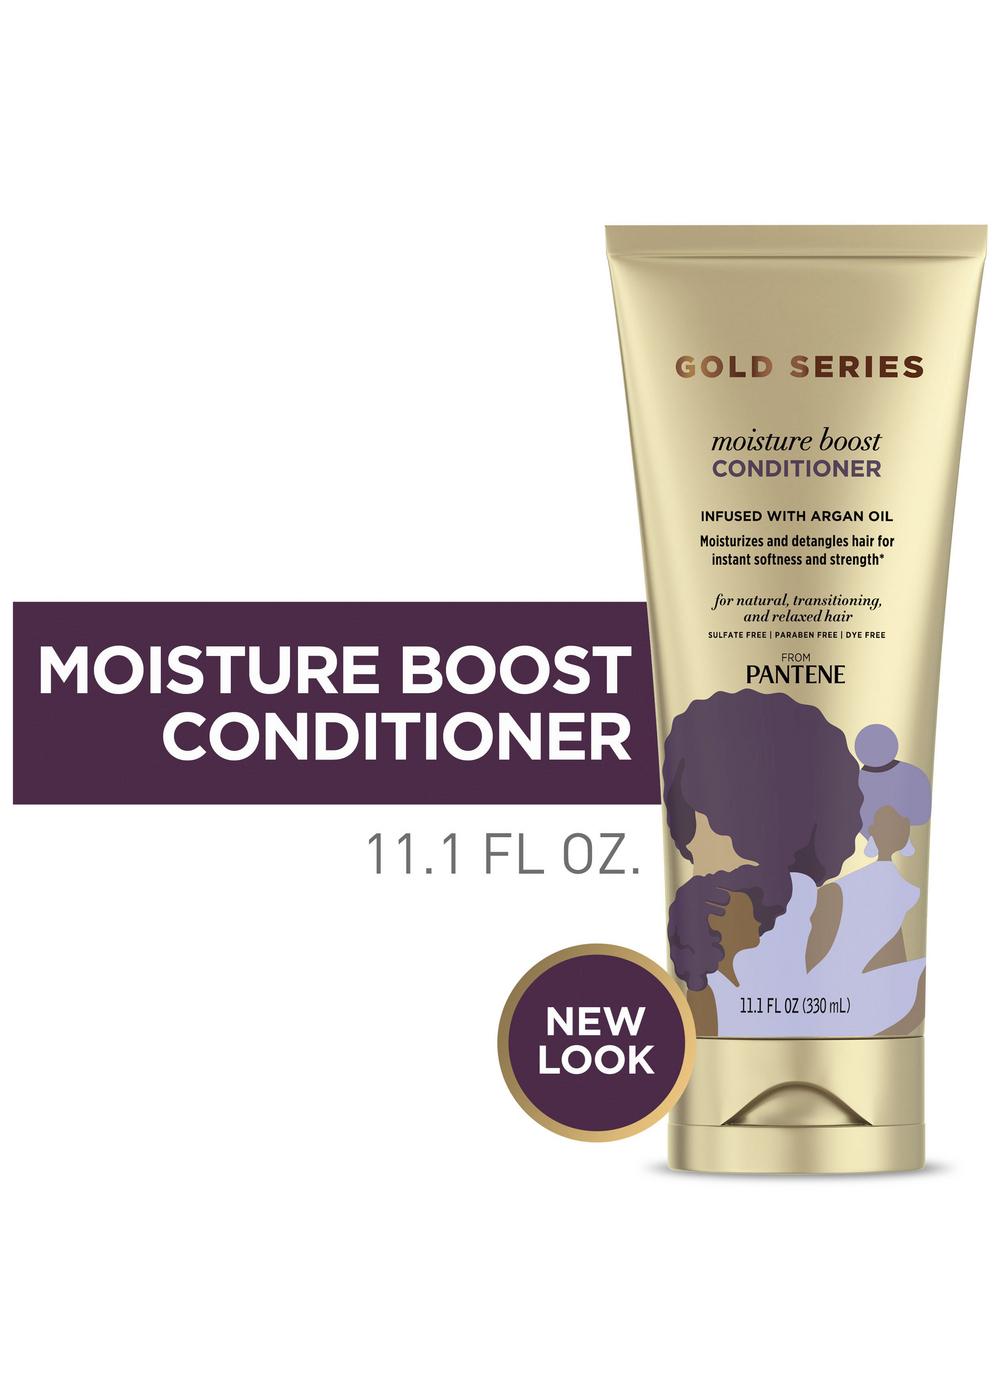 Pantene Gold Series Moisture Boost Conditioner; image 2 of 3